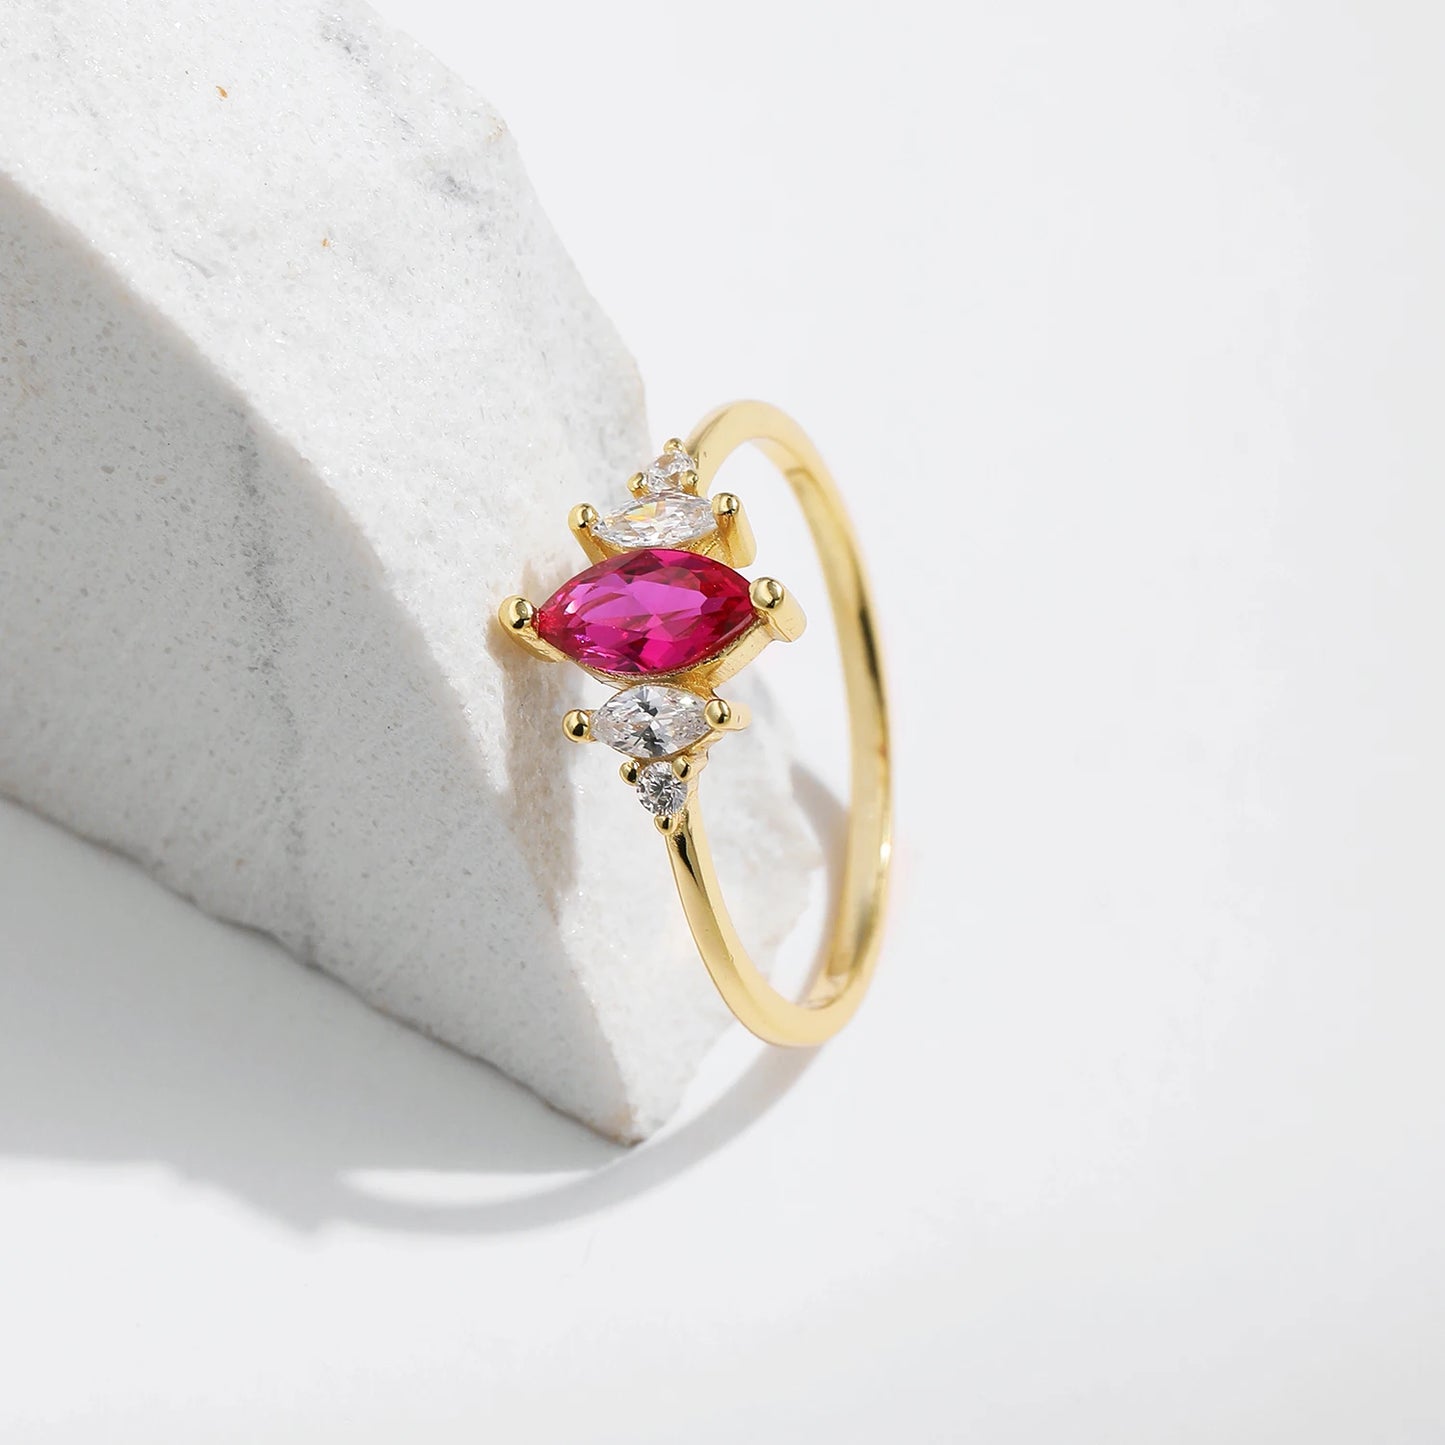 Vintage Pink Stone Ring - 925 Silver Fine Jewelry for Women